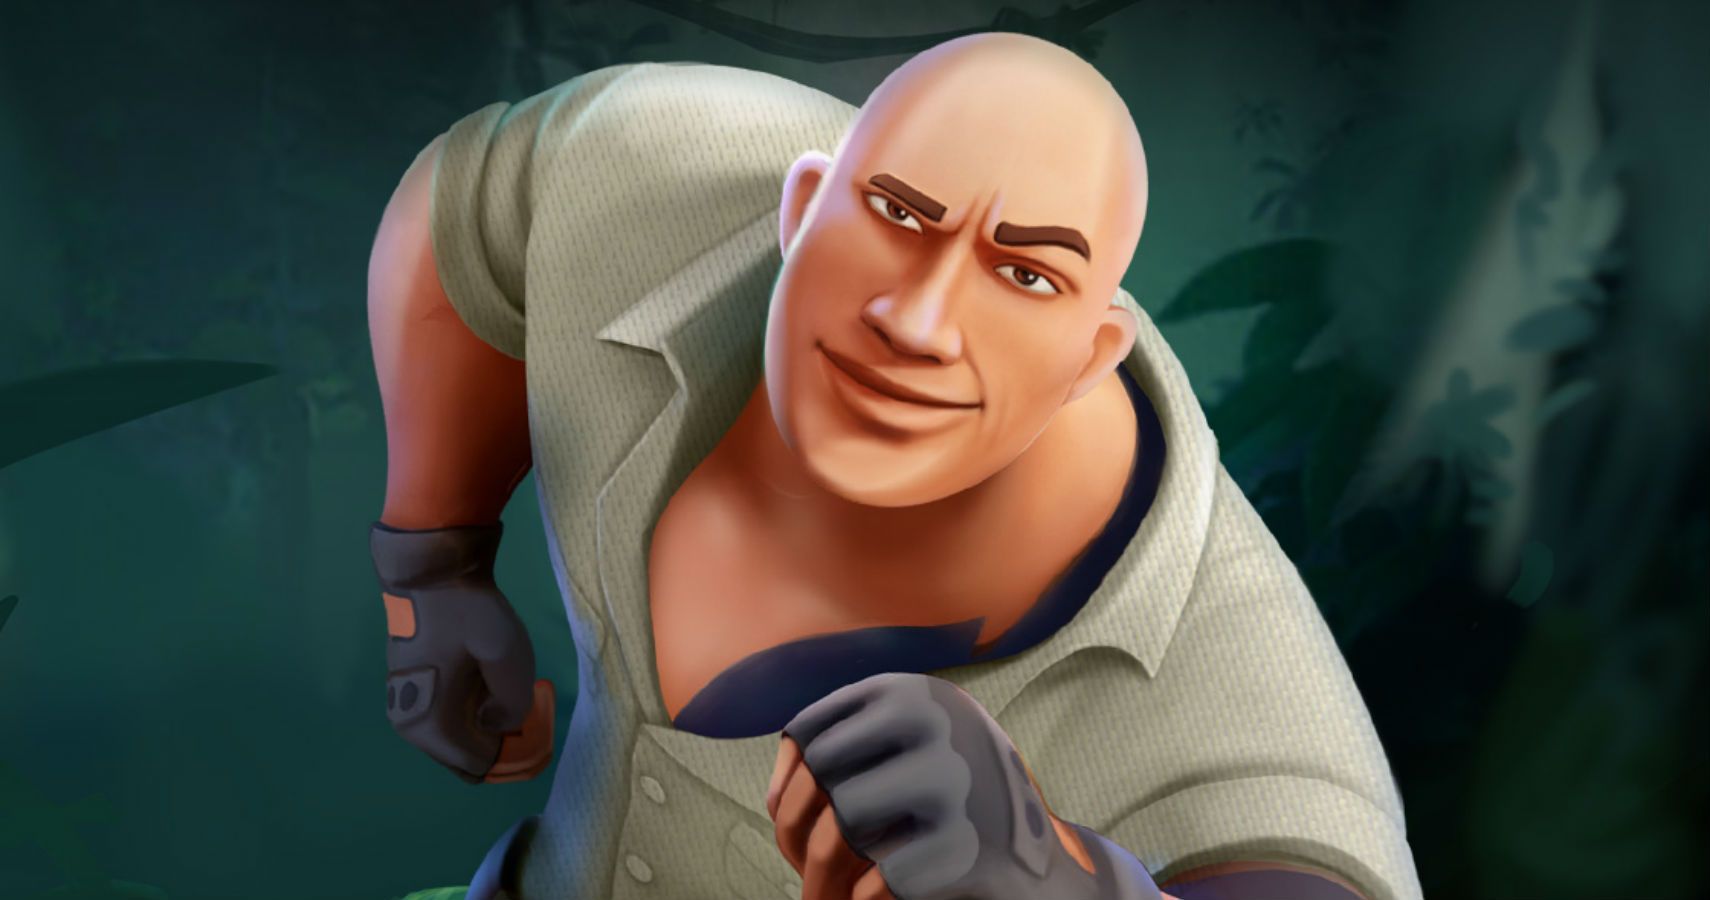 Jumanji Mobile Game Lets You Play As A Cartoon Version Of The Rock